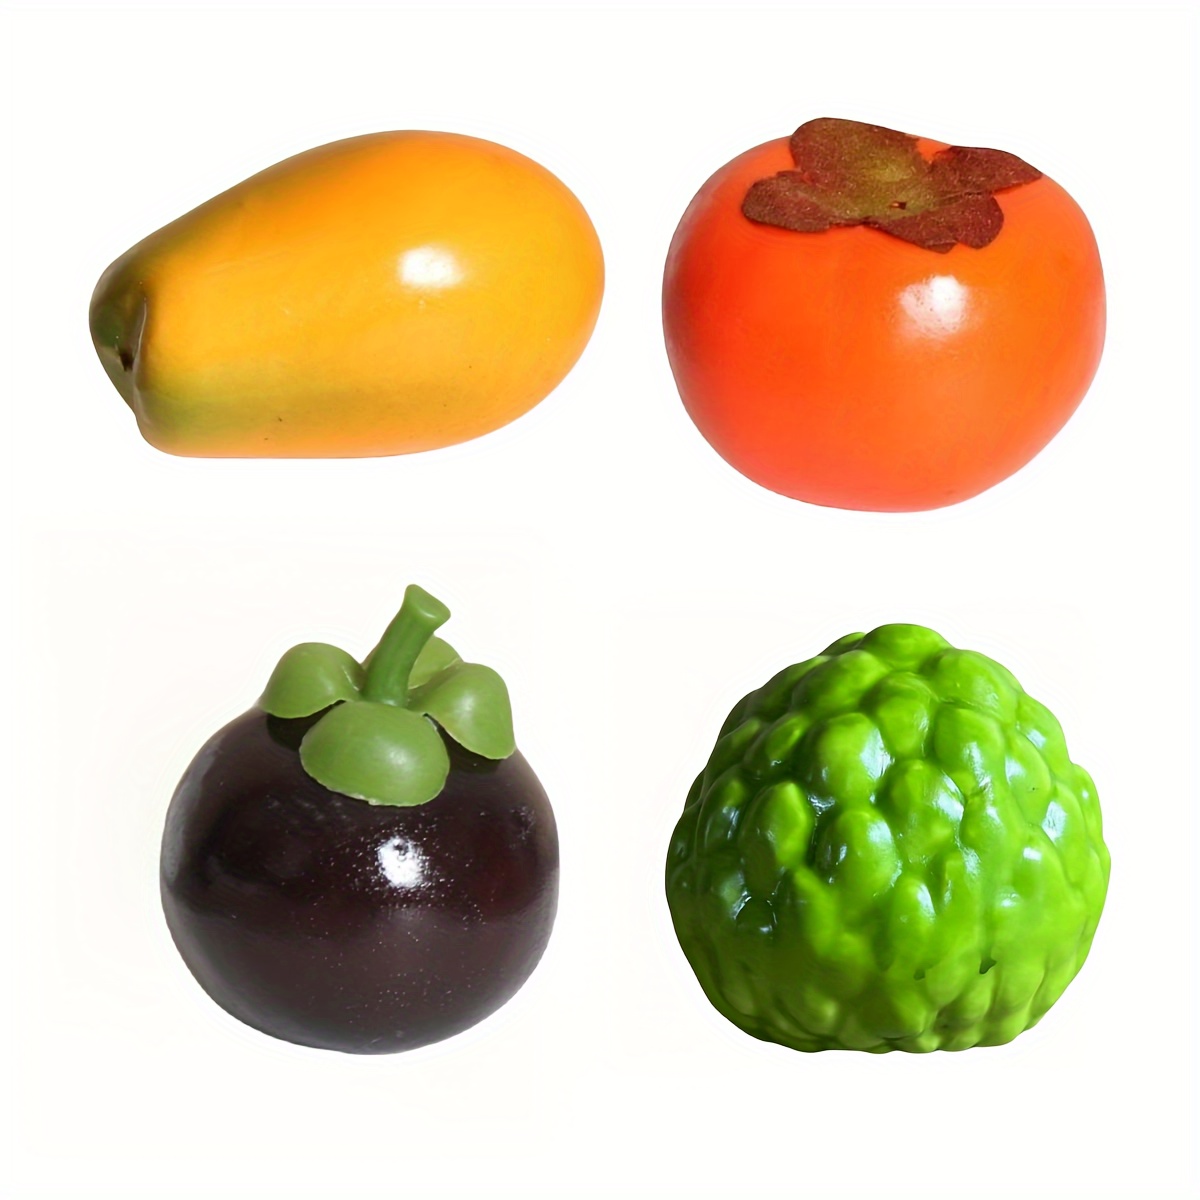 We Bet You Didn't Know This About Decorative Fake Fruit